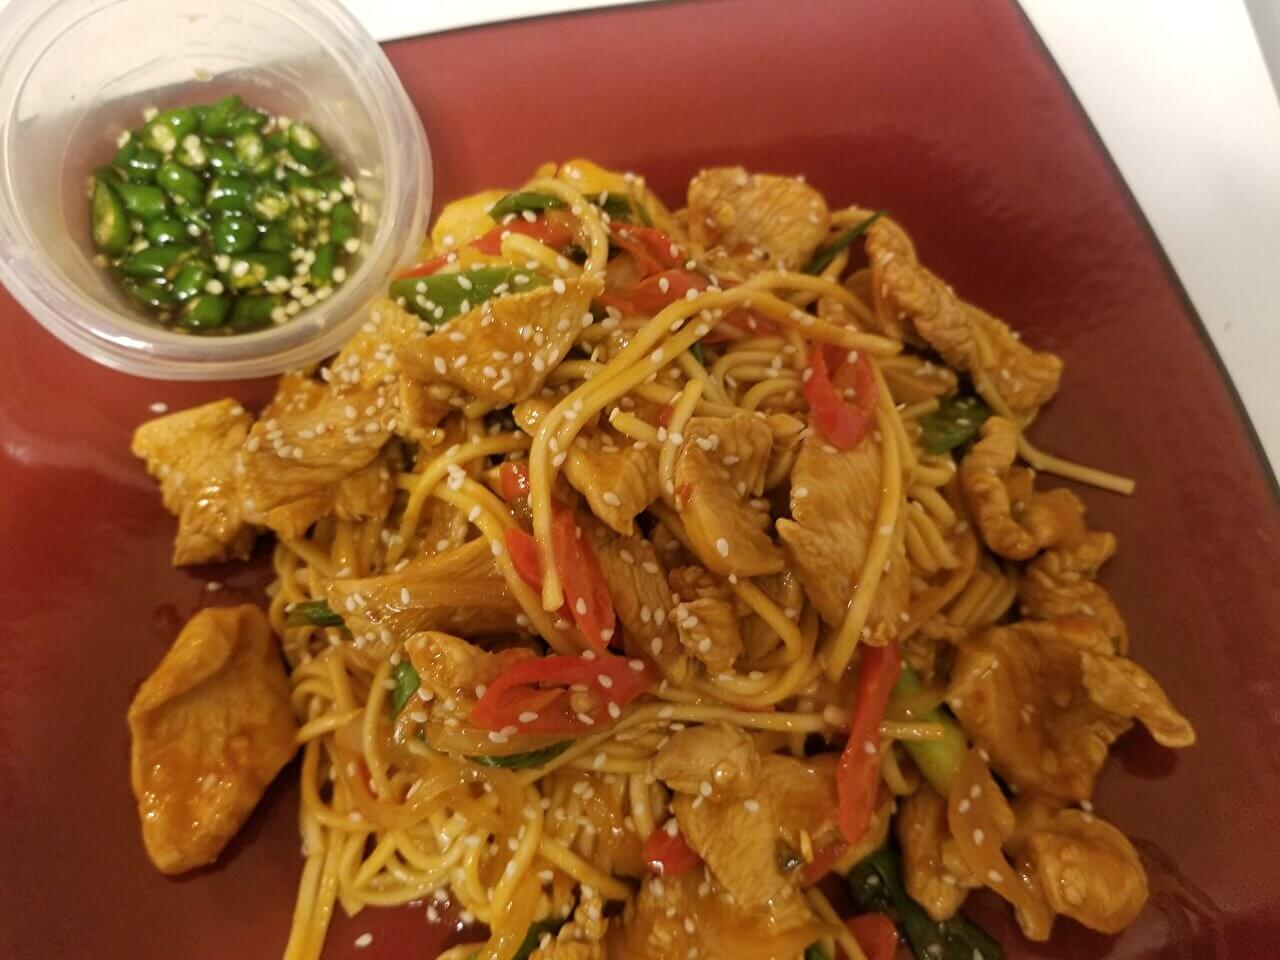 Spicy chicken noodles with prik nam pla on the side